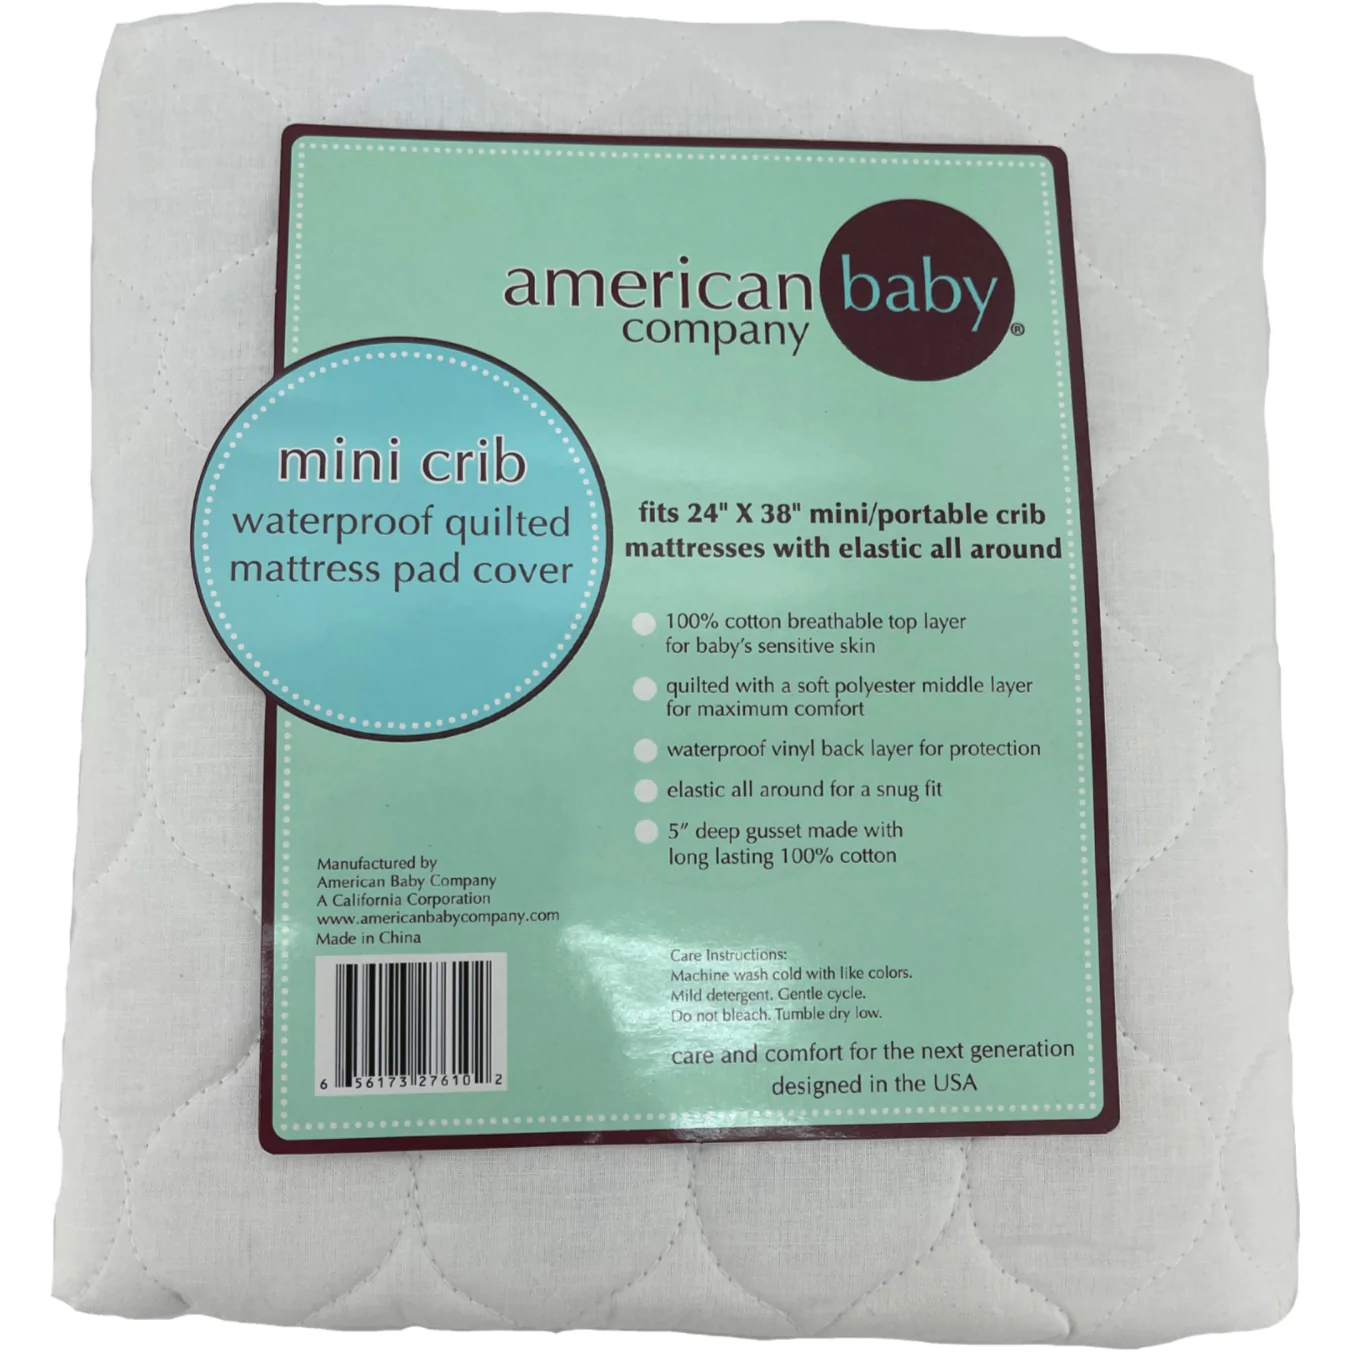 American Baby Mini Crib Mattress Pad Cover / Waterproof Quilted / White / Fits 24" x 38" Mattress